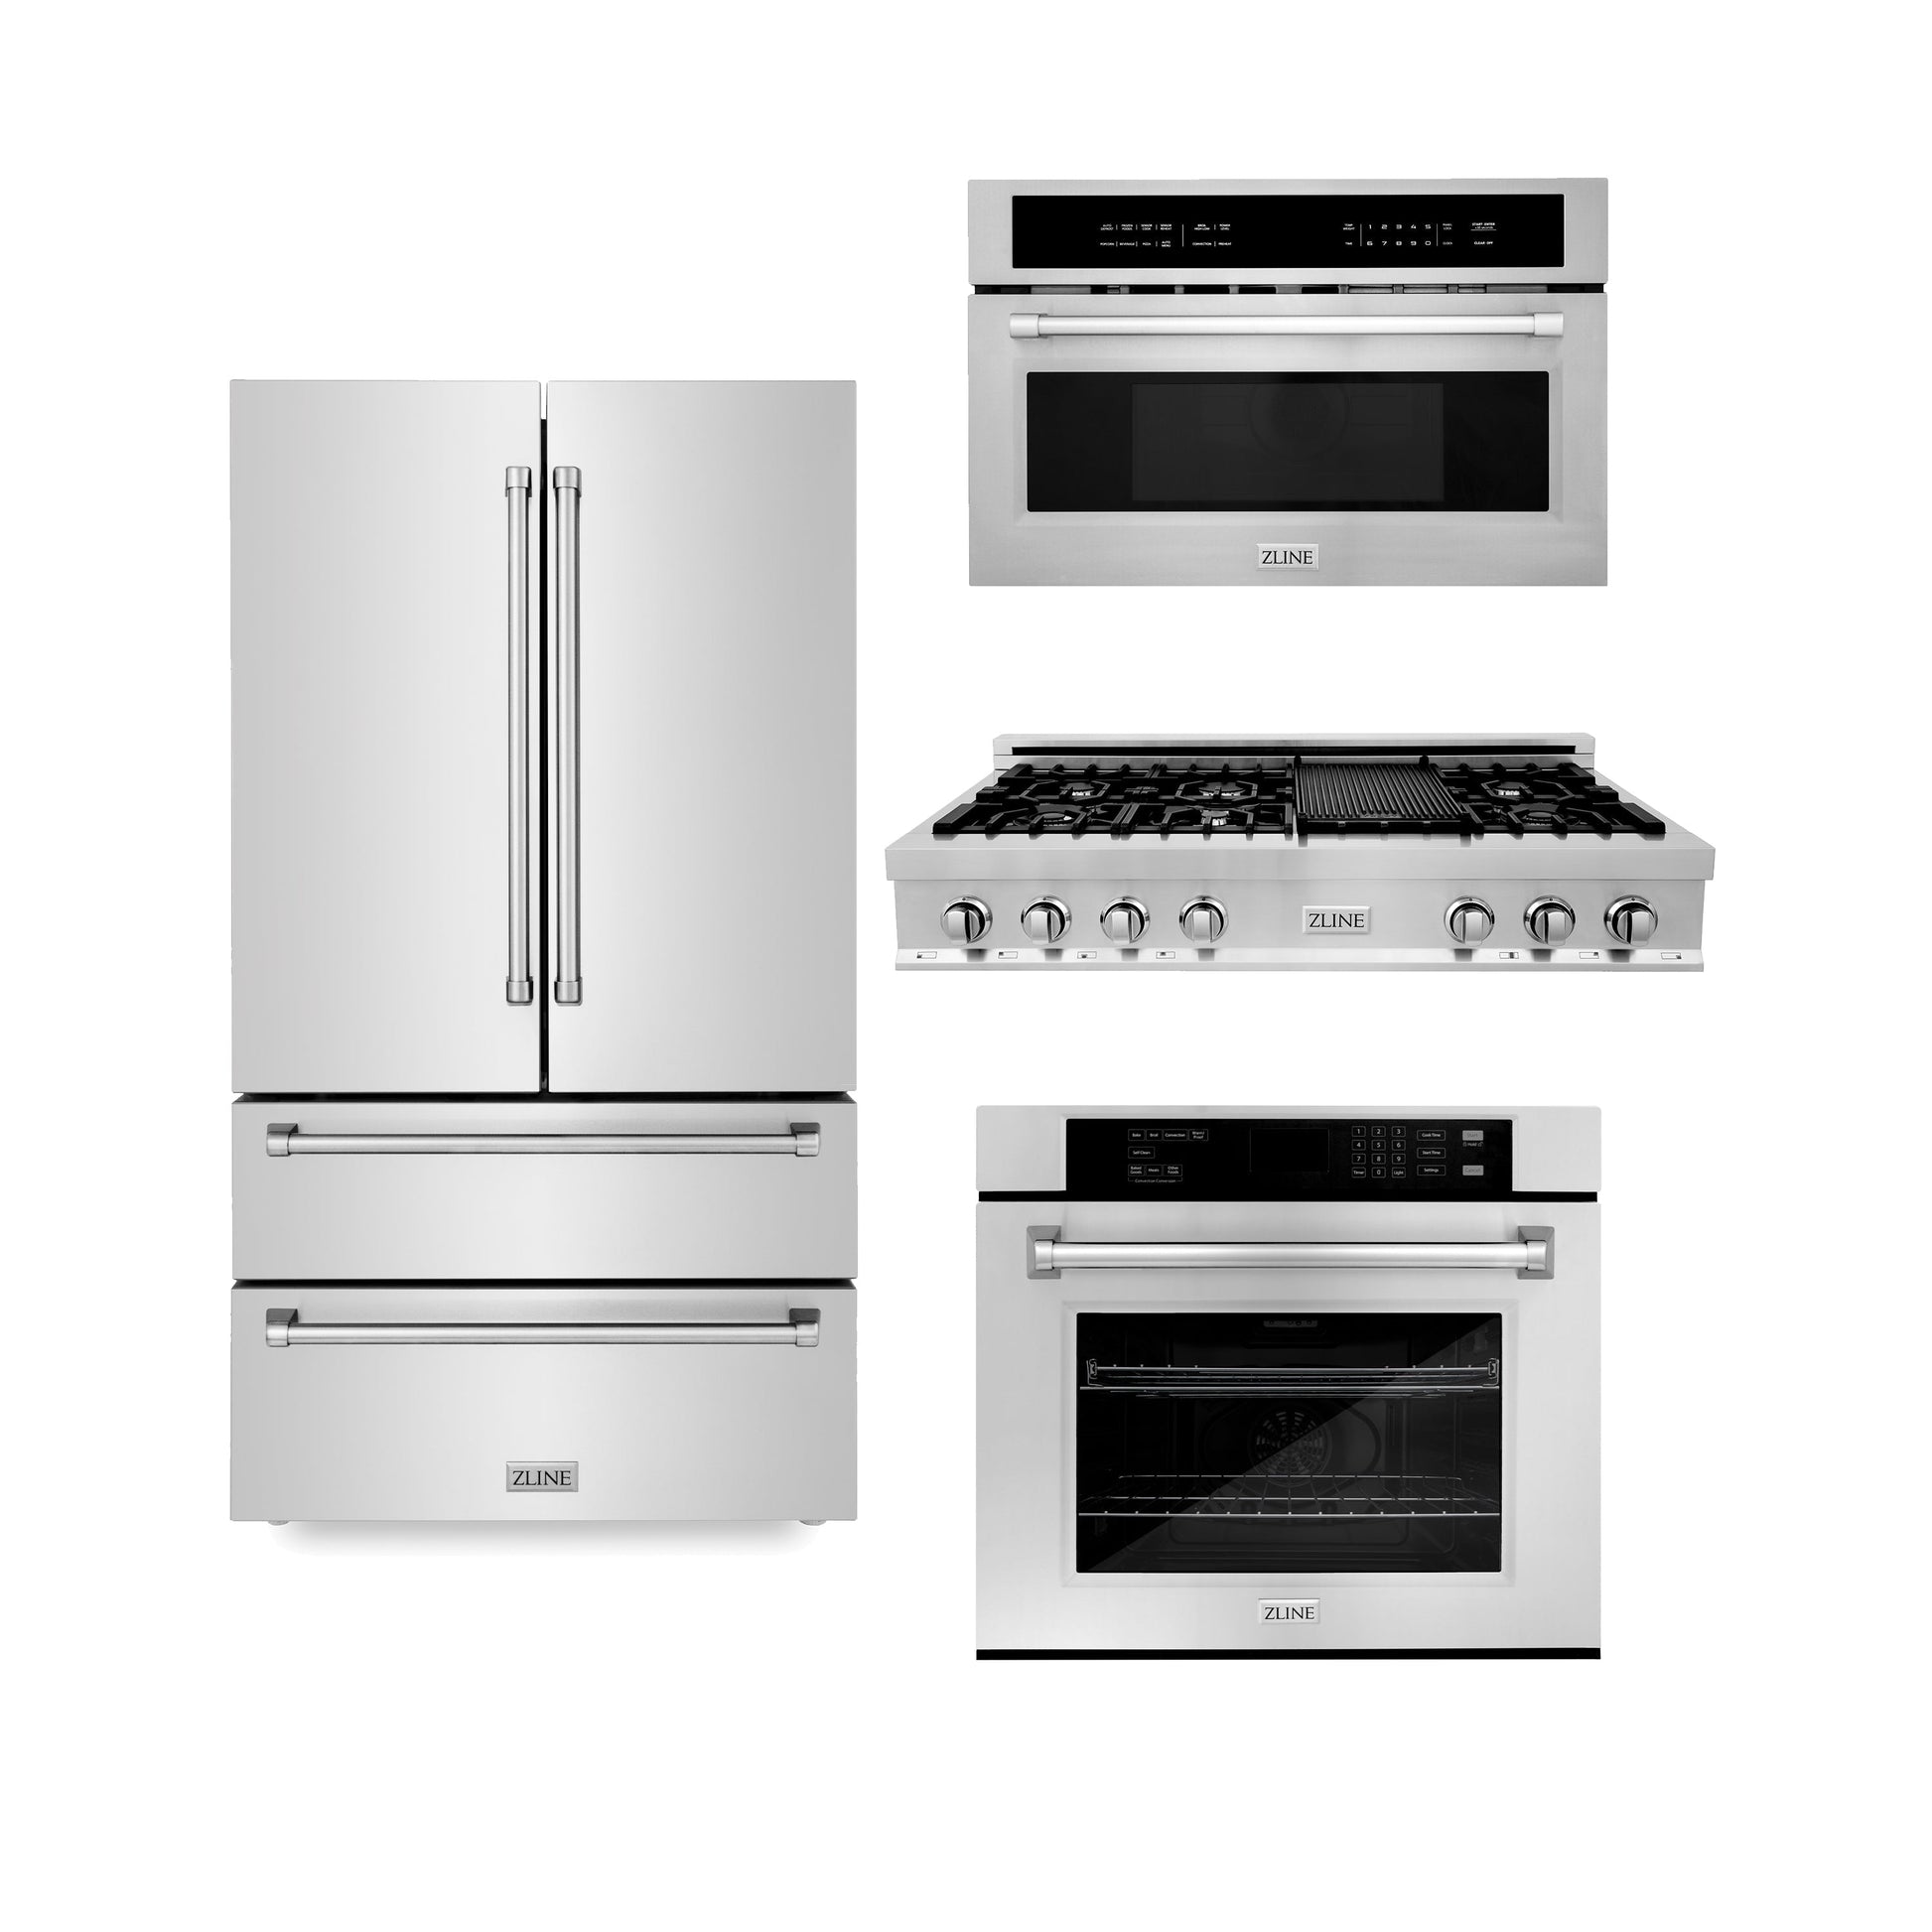 ZLINE 4-Appliance Kitchen Package with Stainless Steel Refrigeration, 48" Rangetop, 30" Single Wall Oven, and 30" Microwave Oven